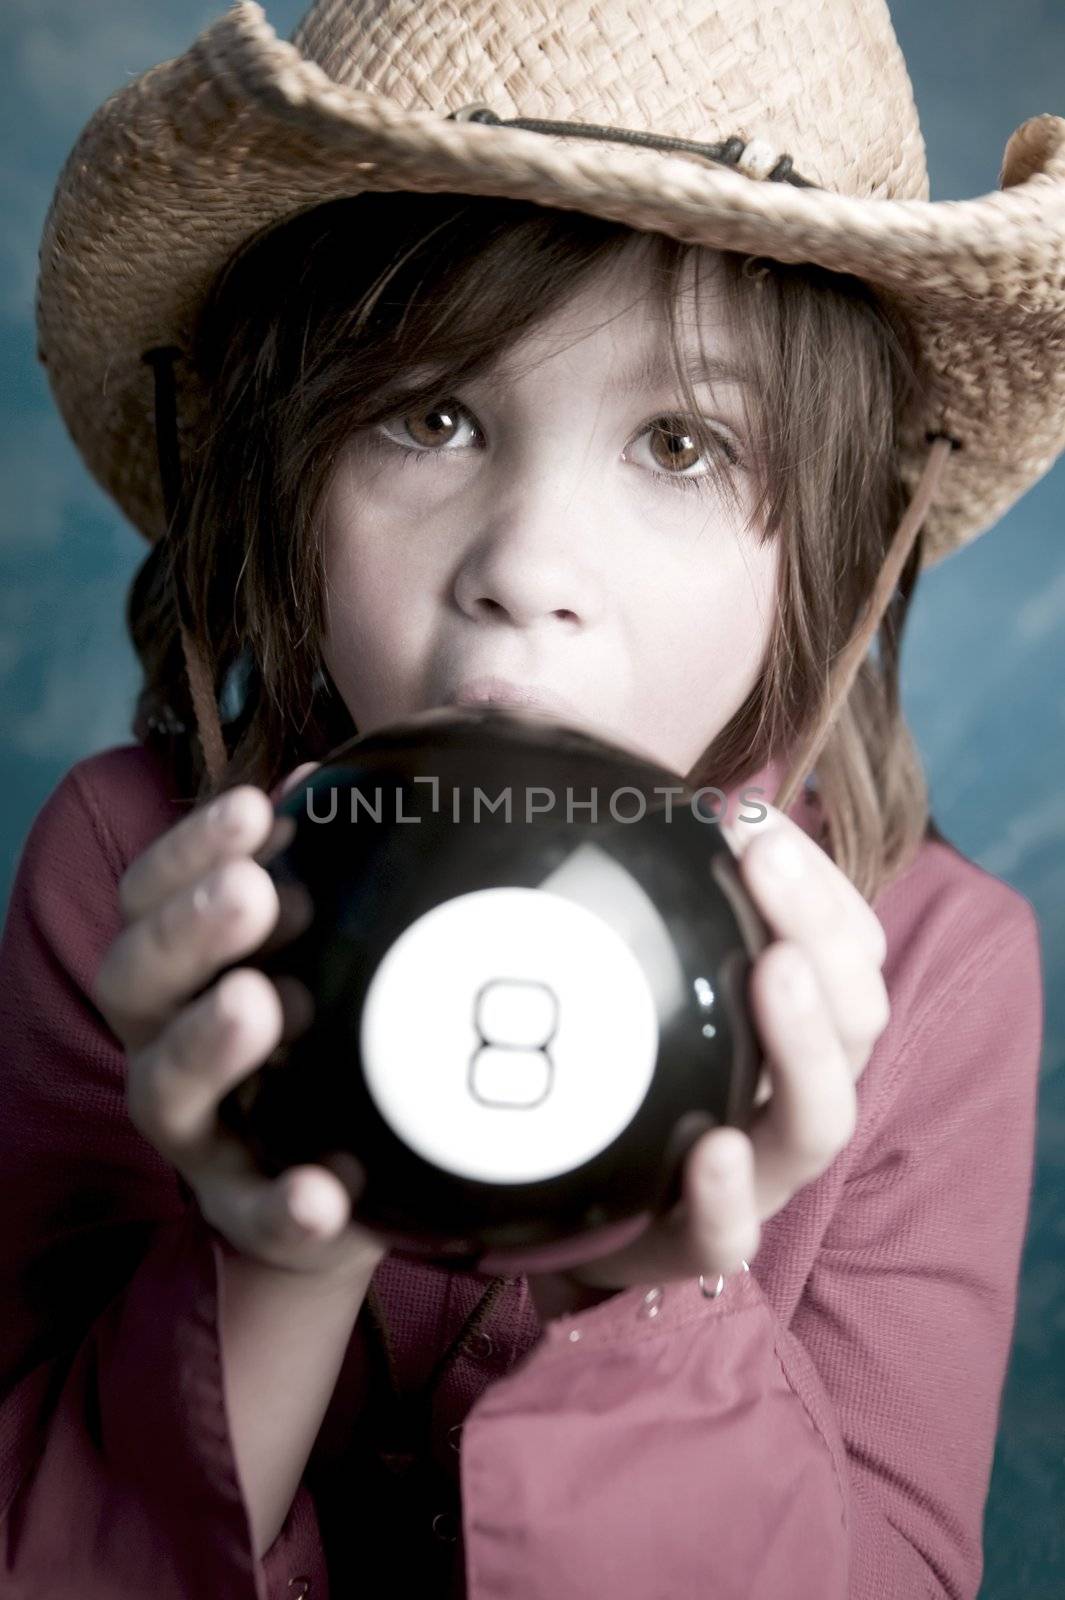 Little girl learns her future from a toy 8 ball